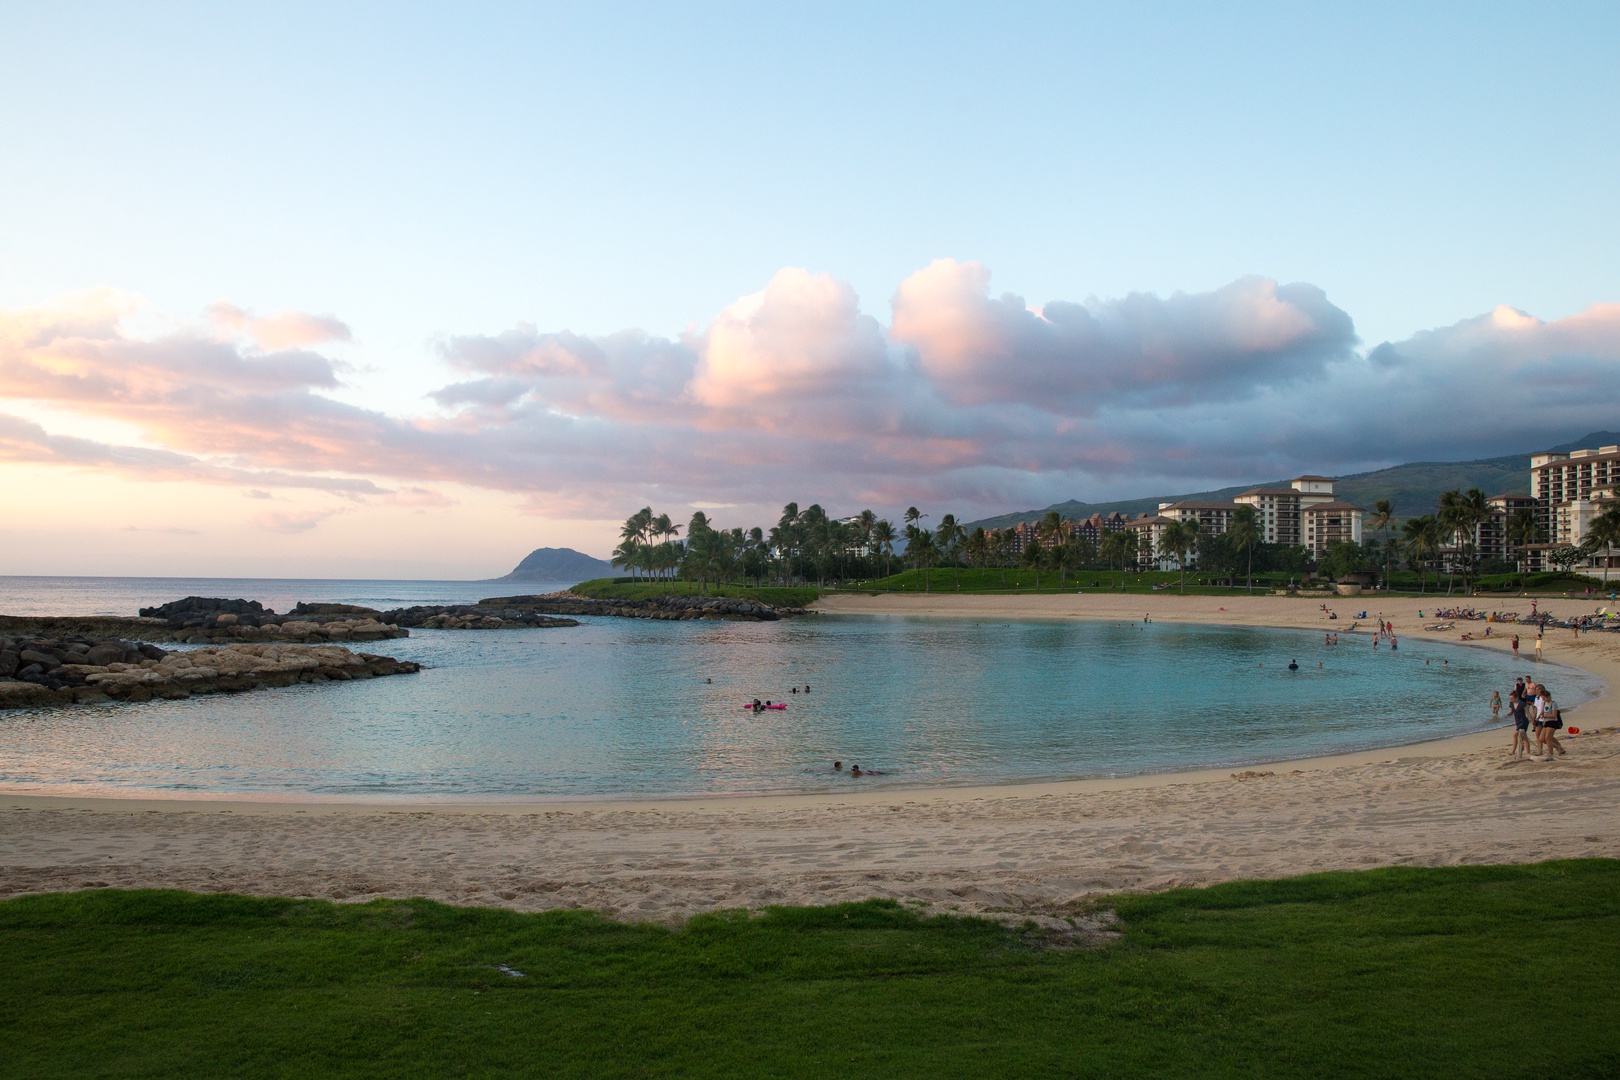 Kapolei Vacation Rentals, Fairways at Ko Olina 33F - Take a stroll along the peaceful shores in paradise.